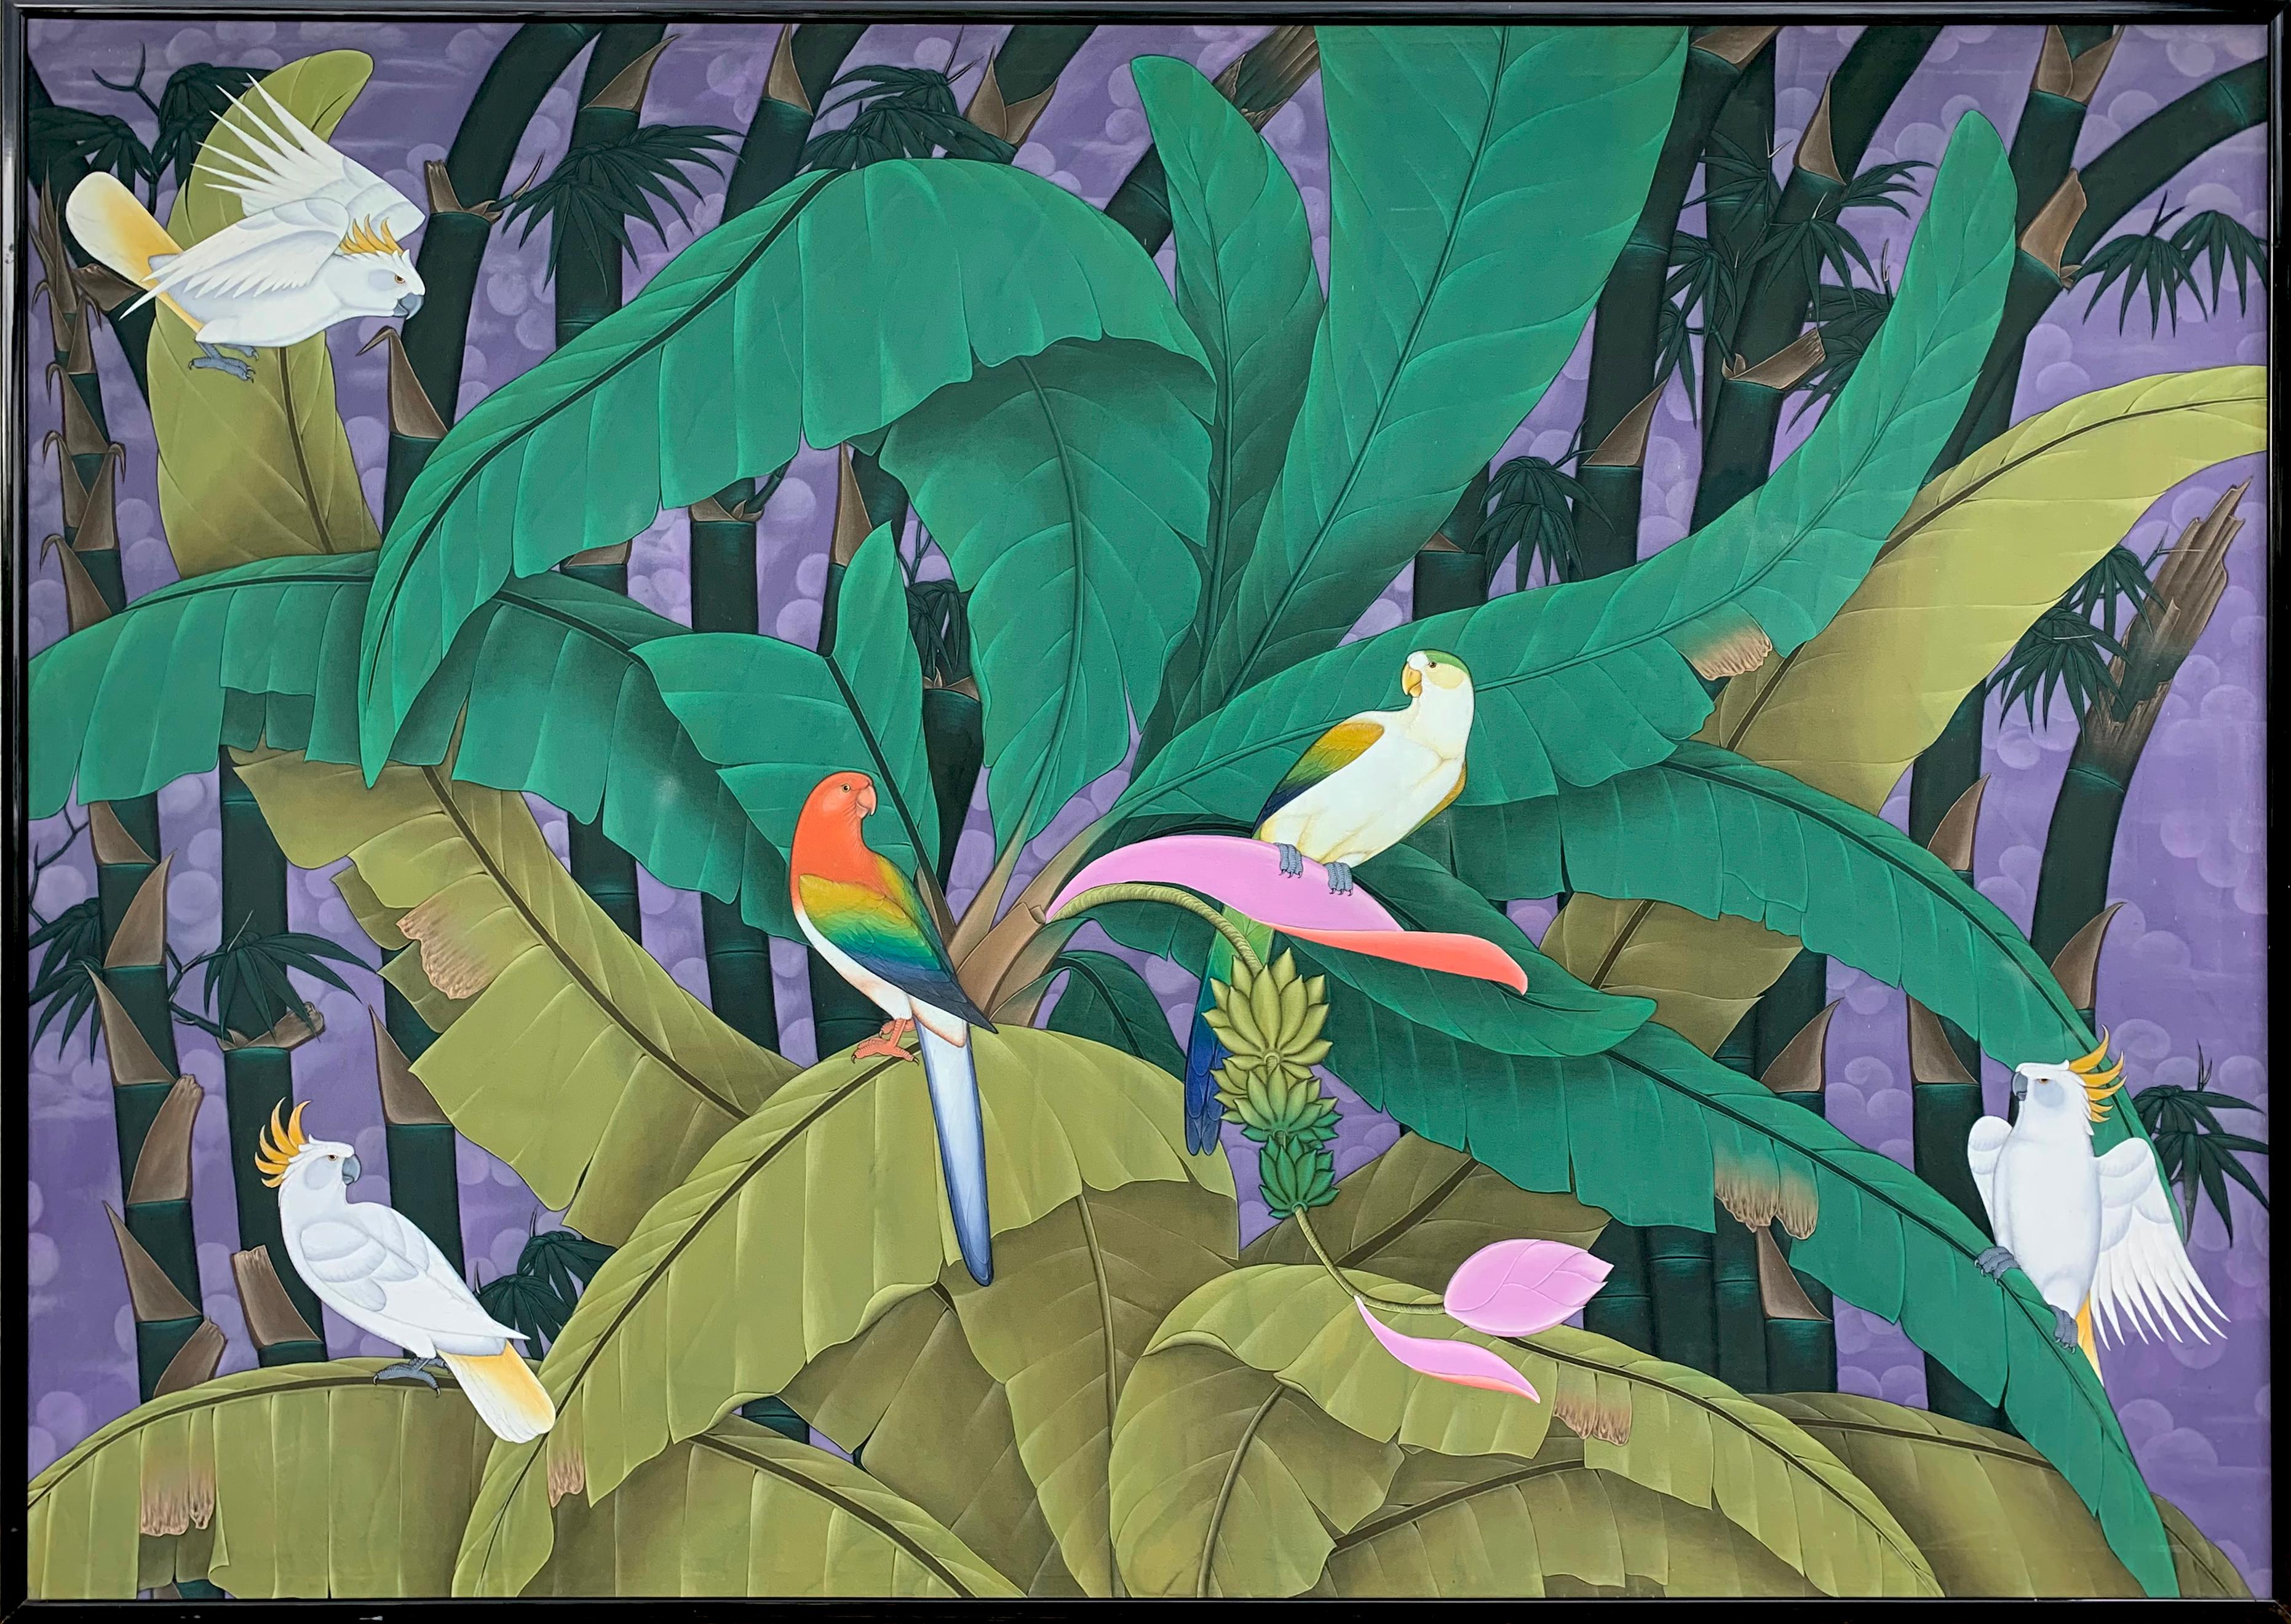 In the Rainforest is a beautiful large painting 200 x 142 cm full of color and light. 
Birds are sitting on the branches and flying through the Bambus trees. 
About the Gallery:
Folly and Muse was established in 2015 in London to find and